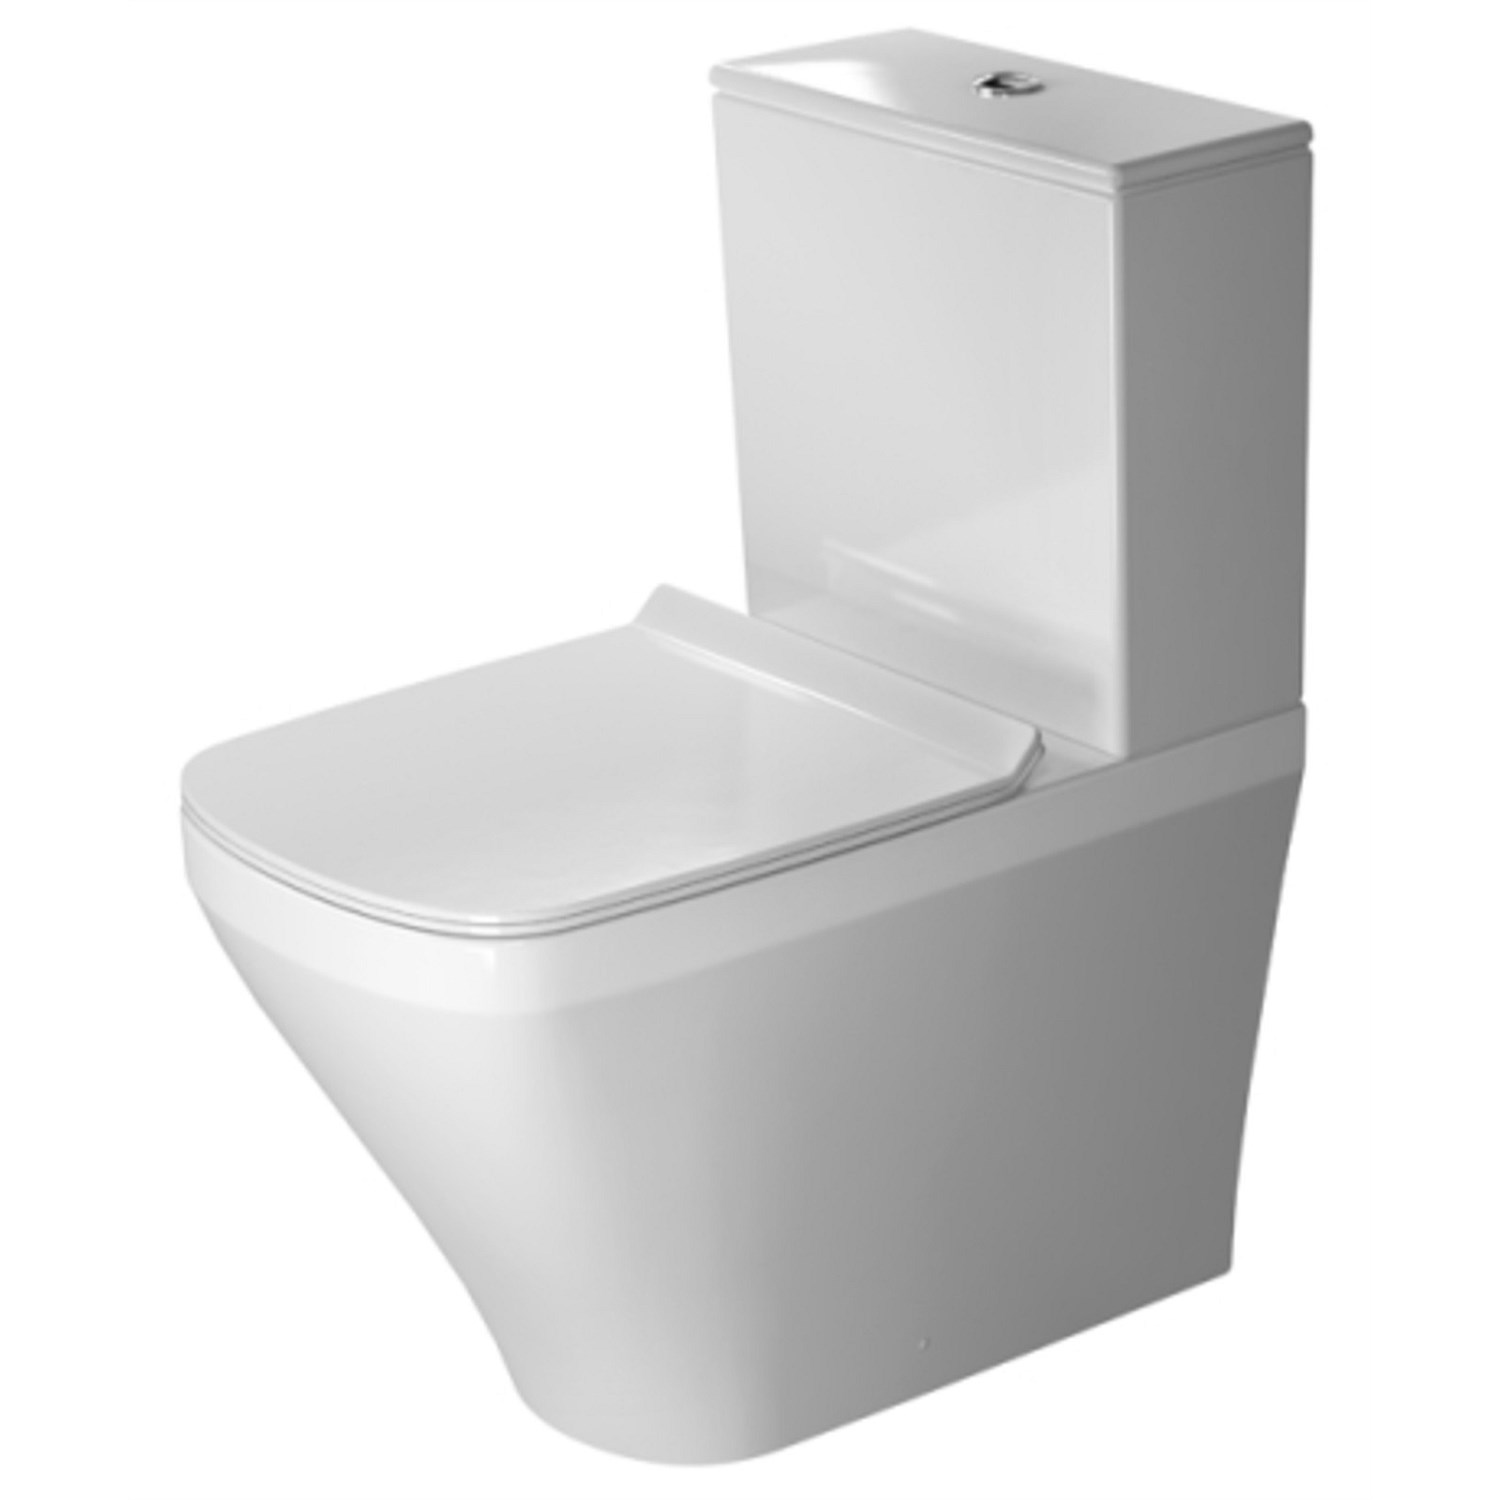 Back-to-wall - Duravit DuraStyle Back-To-Wall Toilet Suite